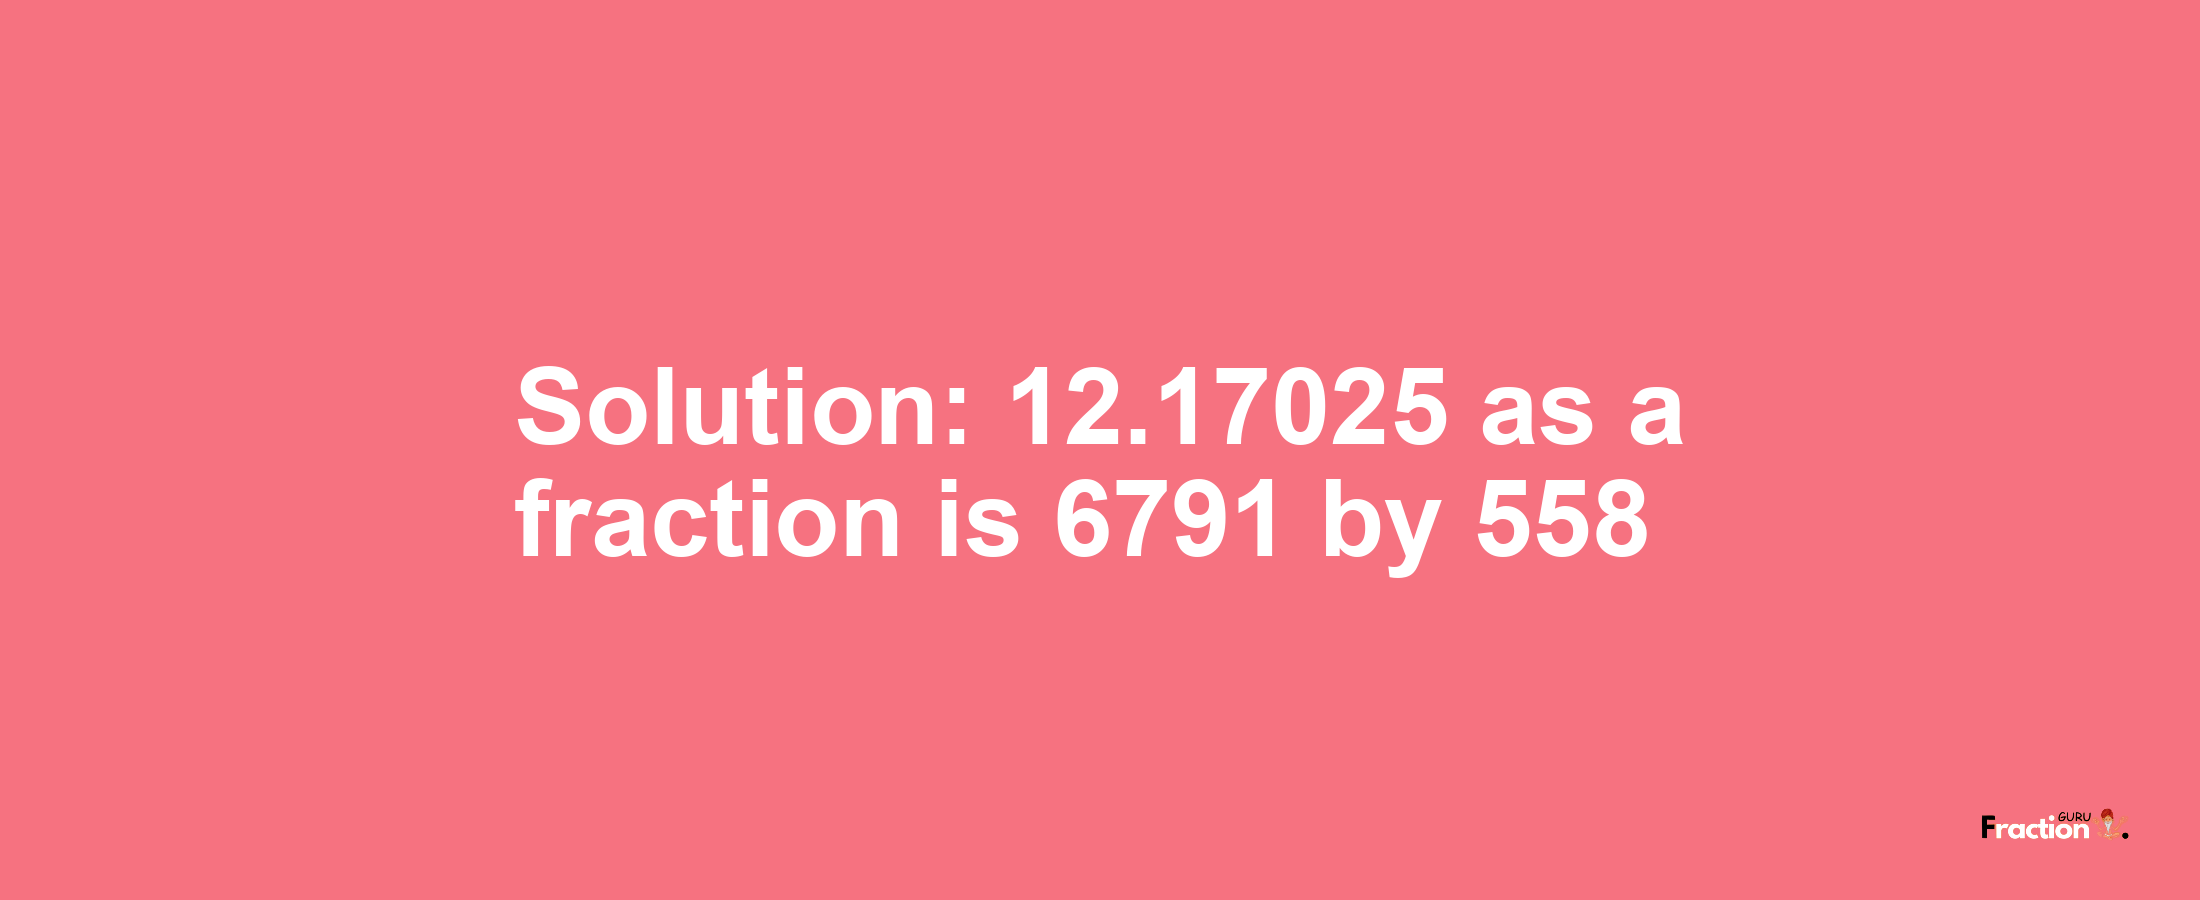 Solution:12.17025 as a fraction is 6791/558